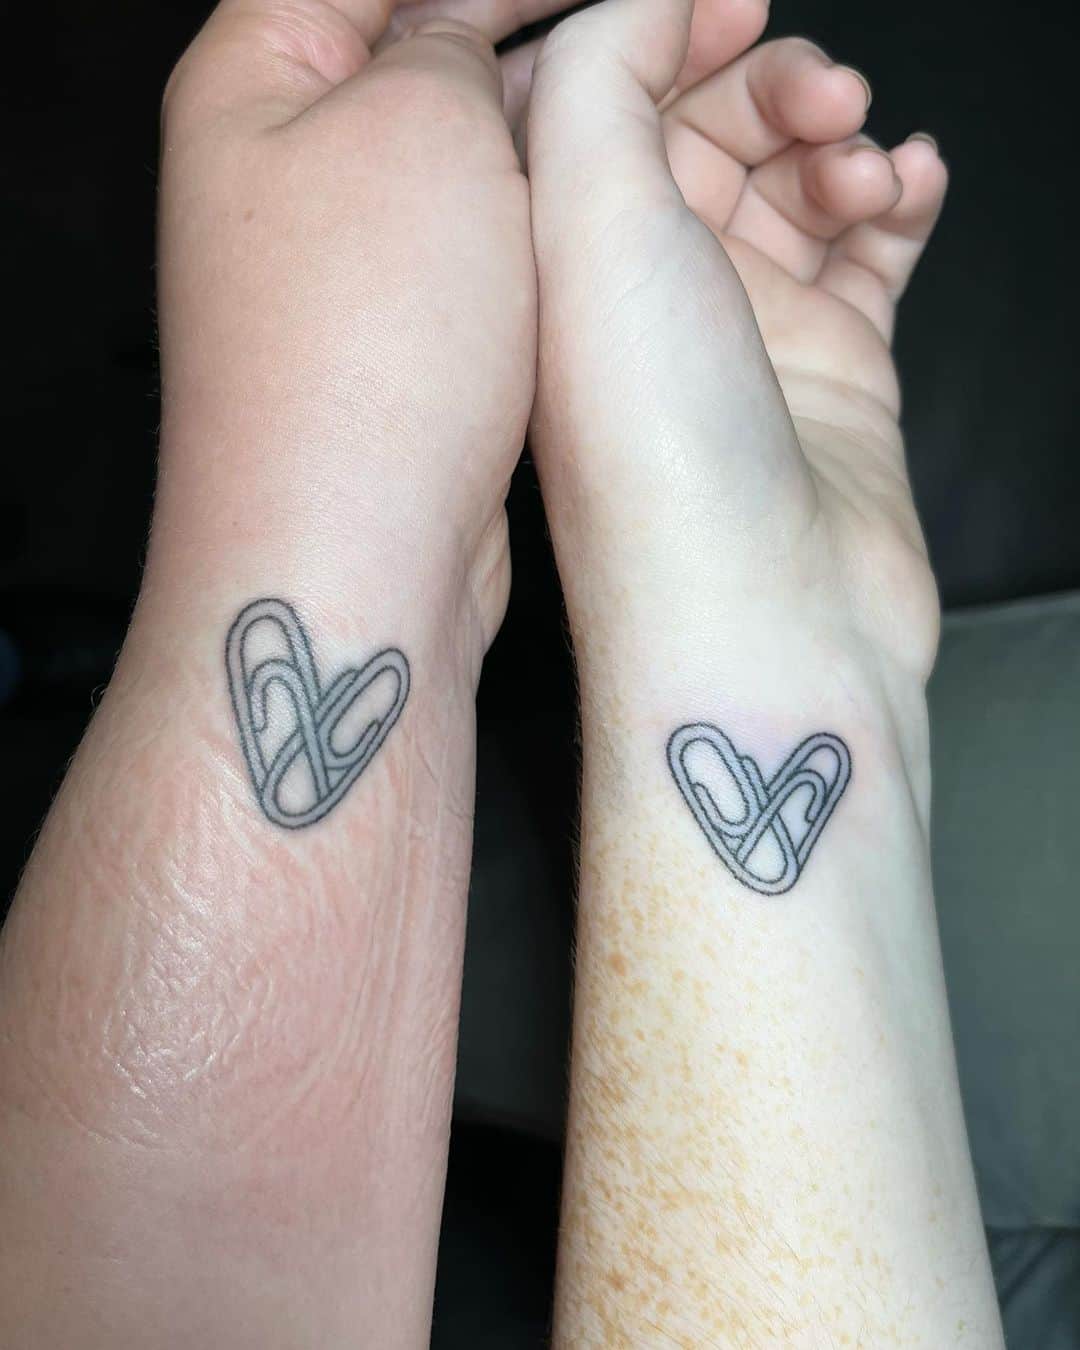 Adorable paper clips tattoo design for BFFs